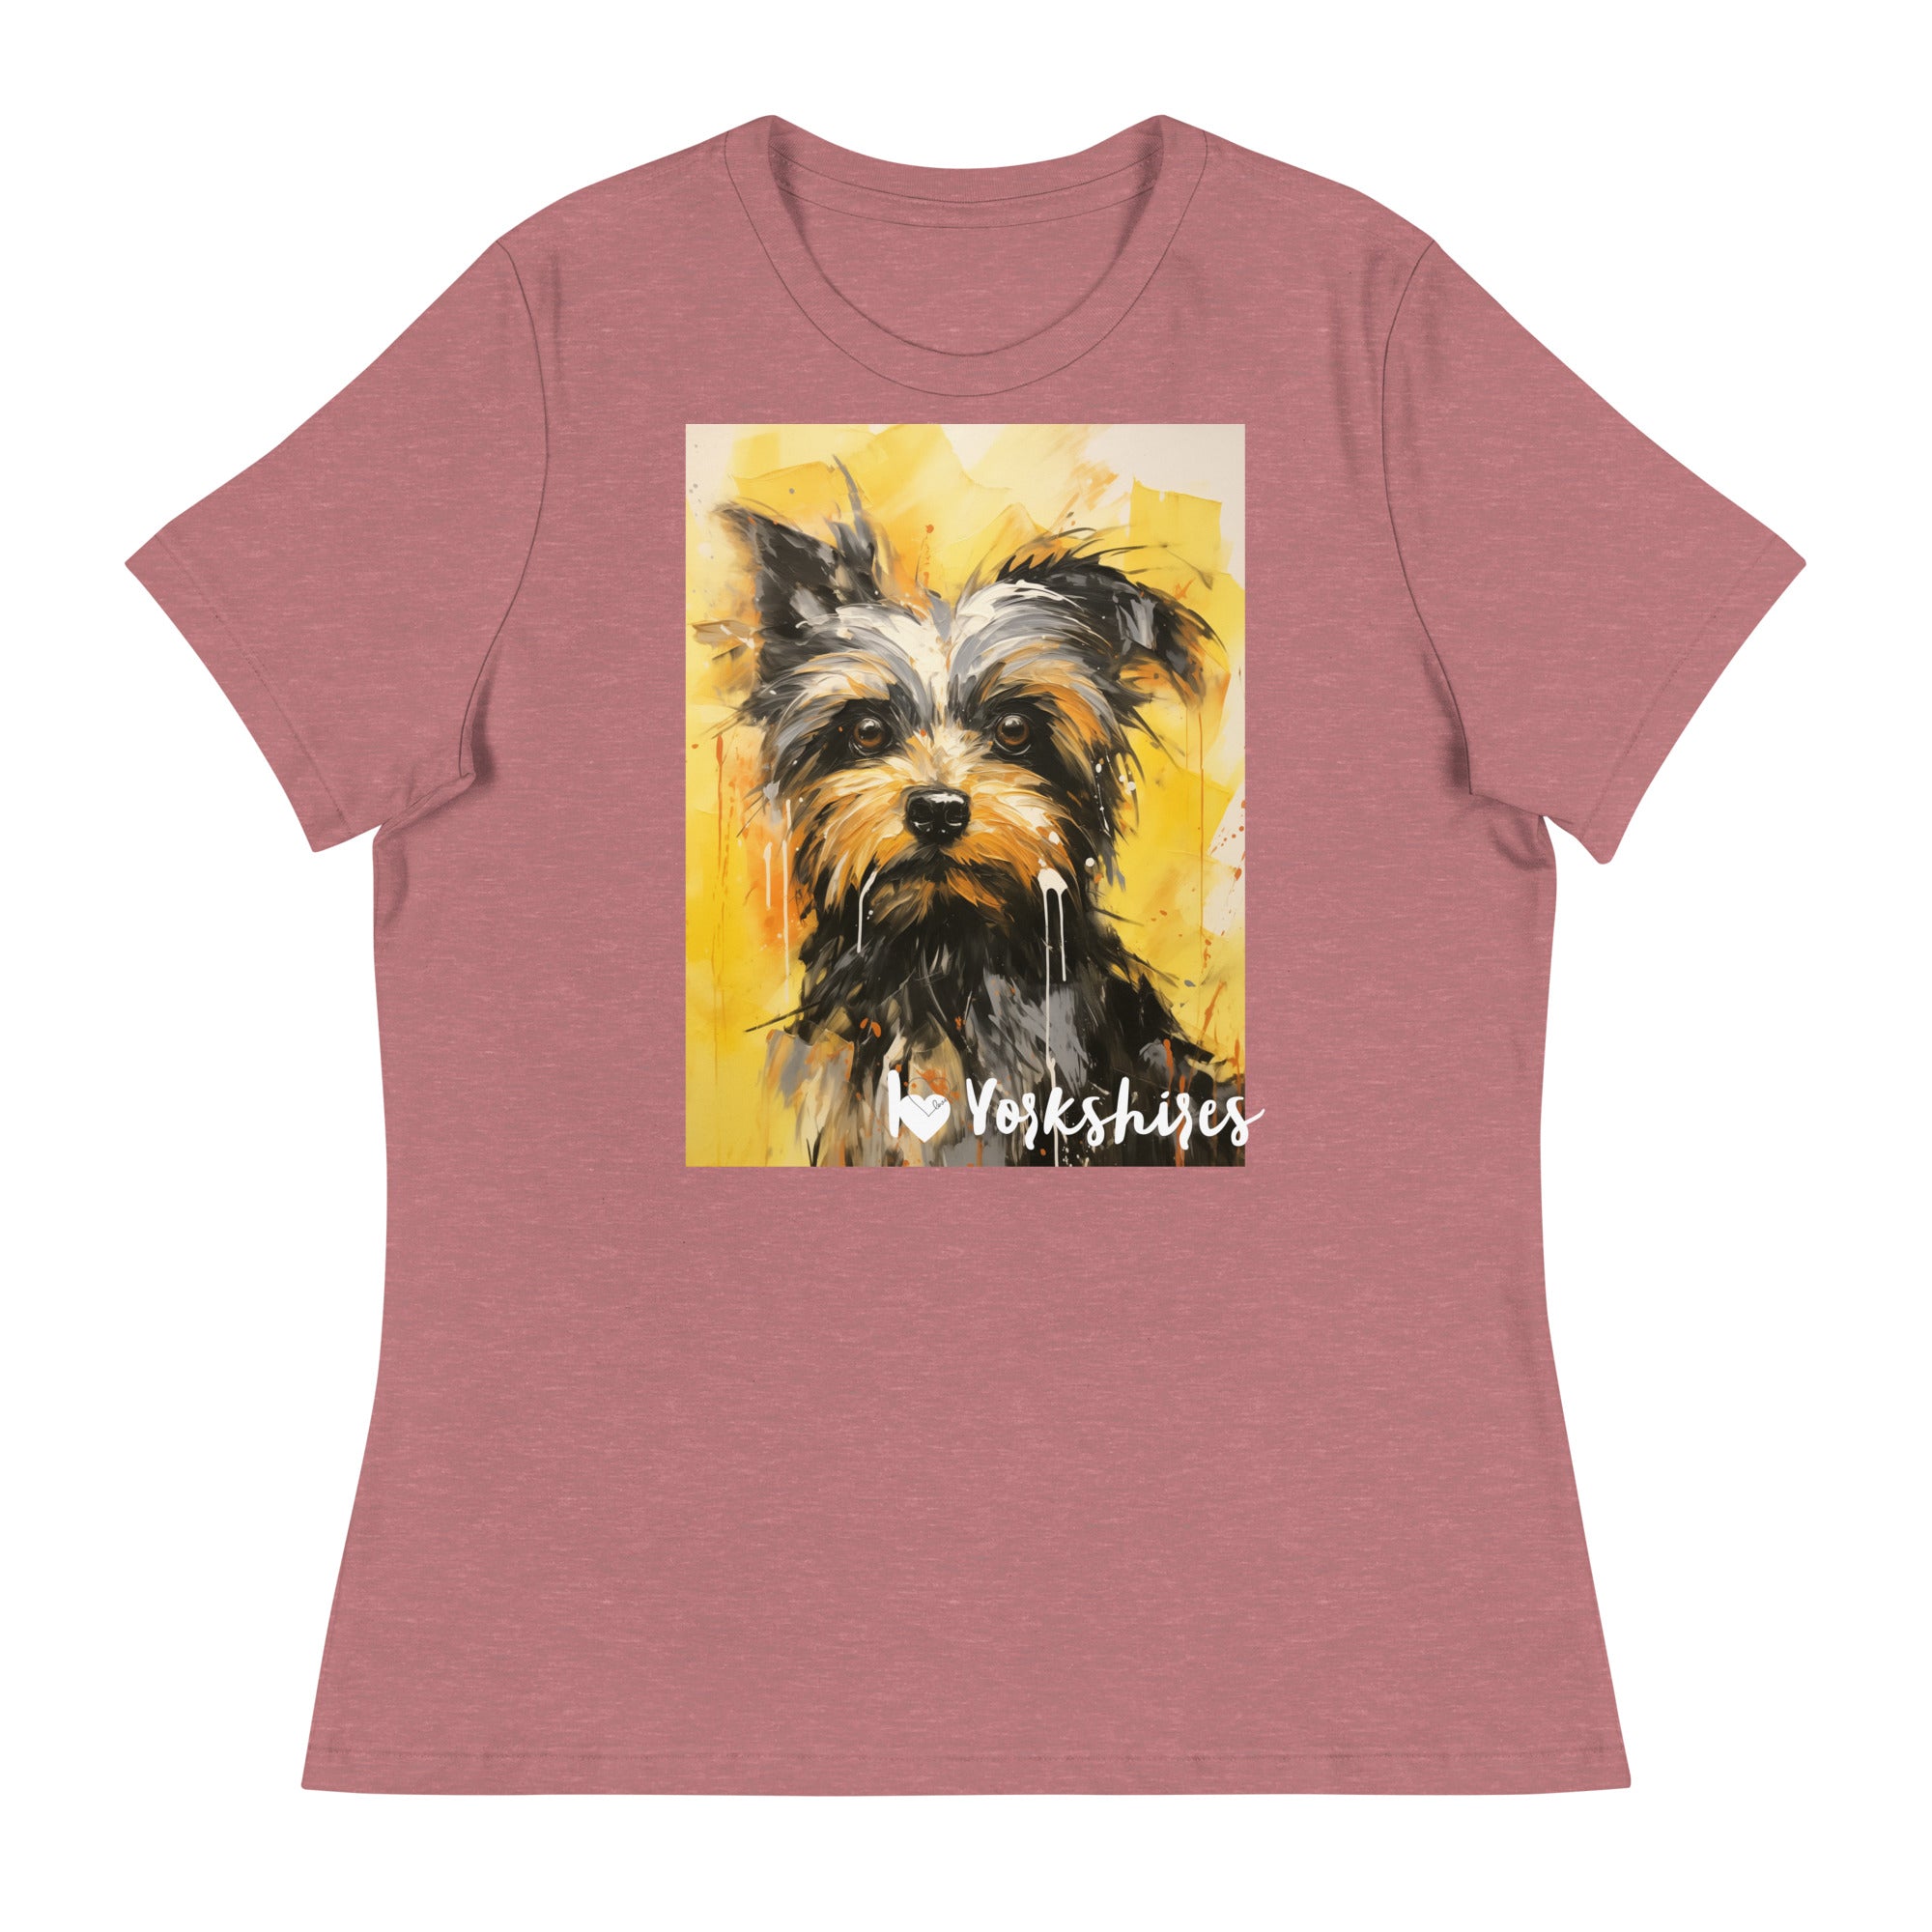 Women's Relaxed T-Shirt - I ❤ Dogs - Yorkshire Terrier